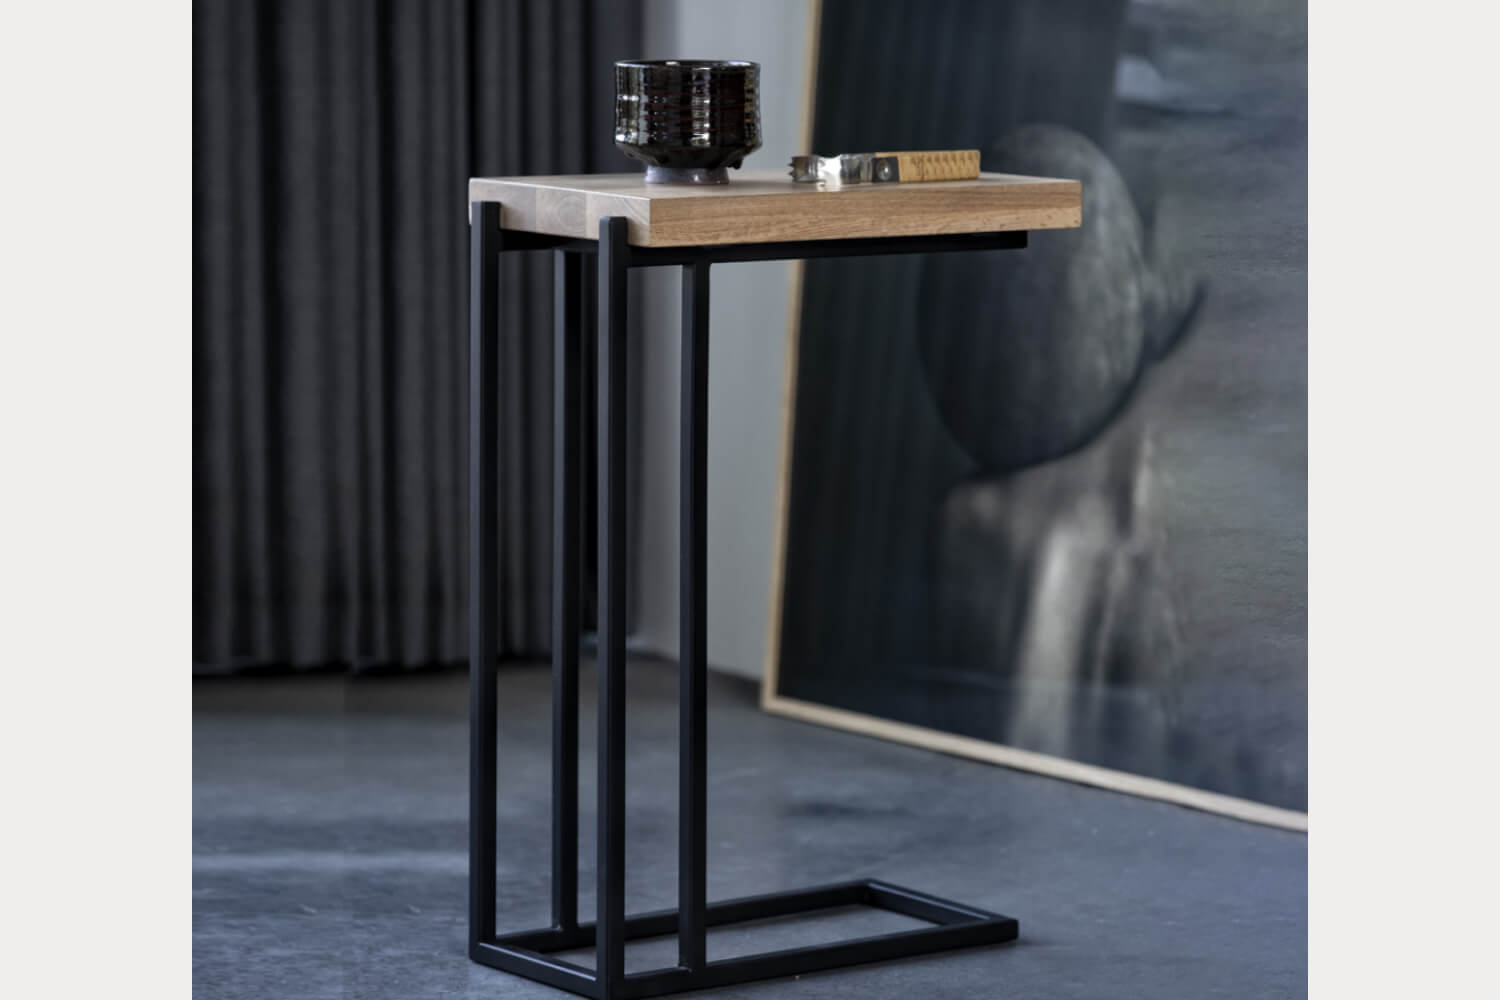 Luka Oak Wood Side Table with a slender black metal frame supporting a simple oak wood top.